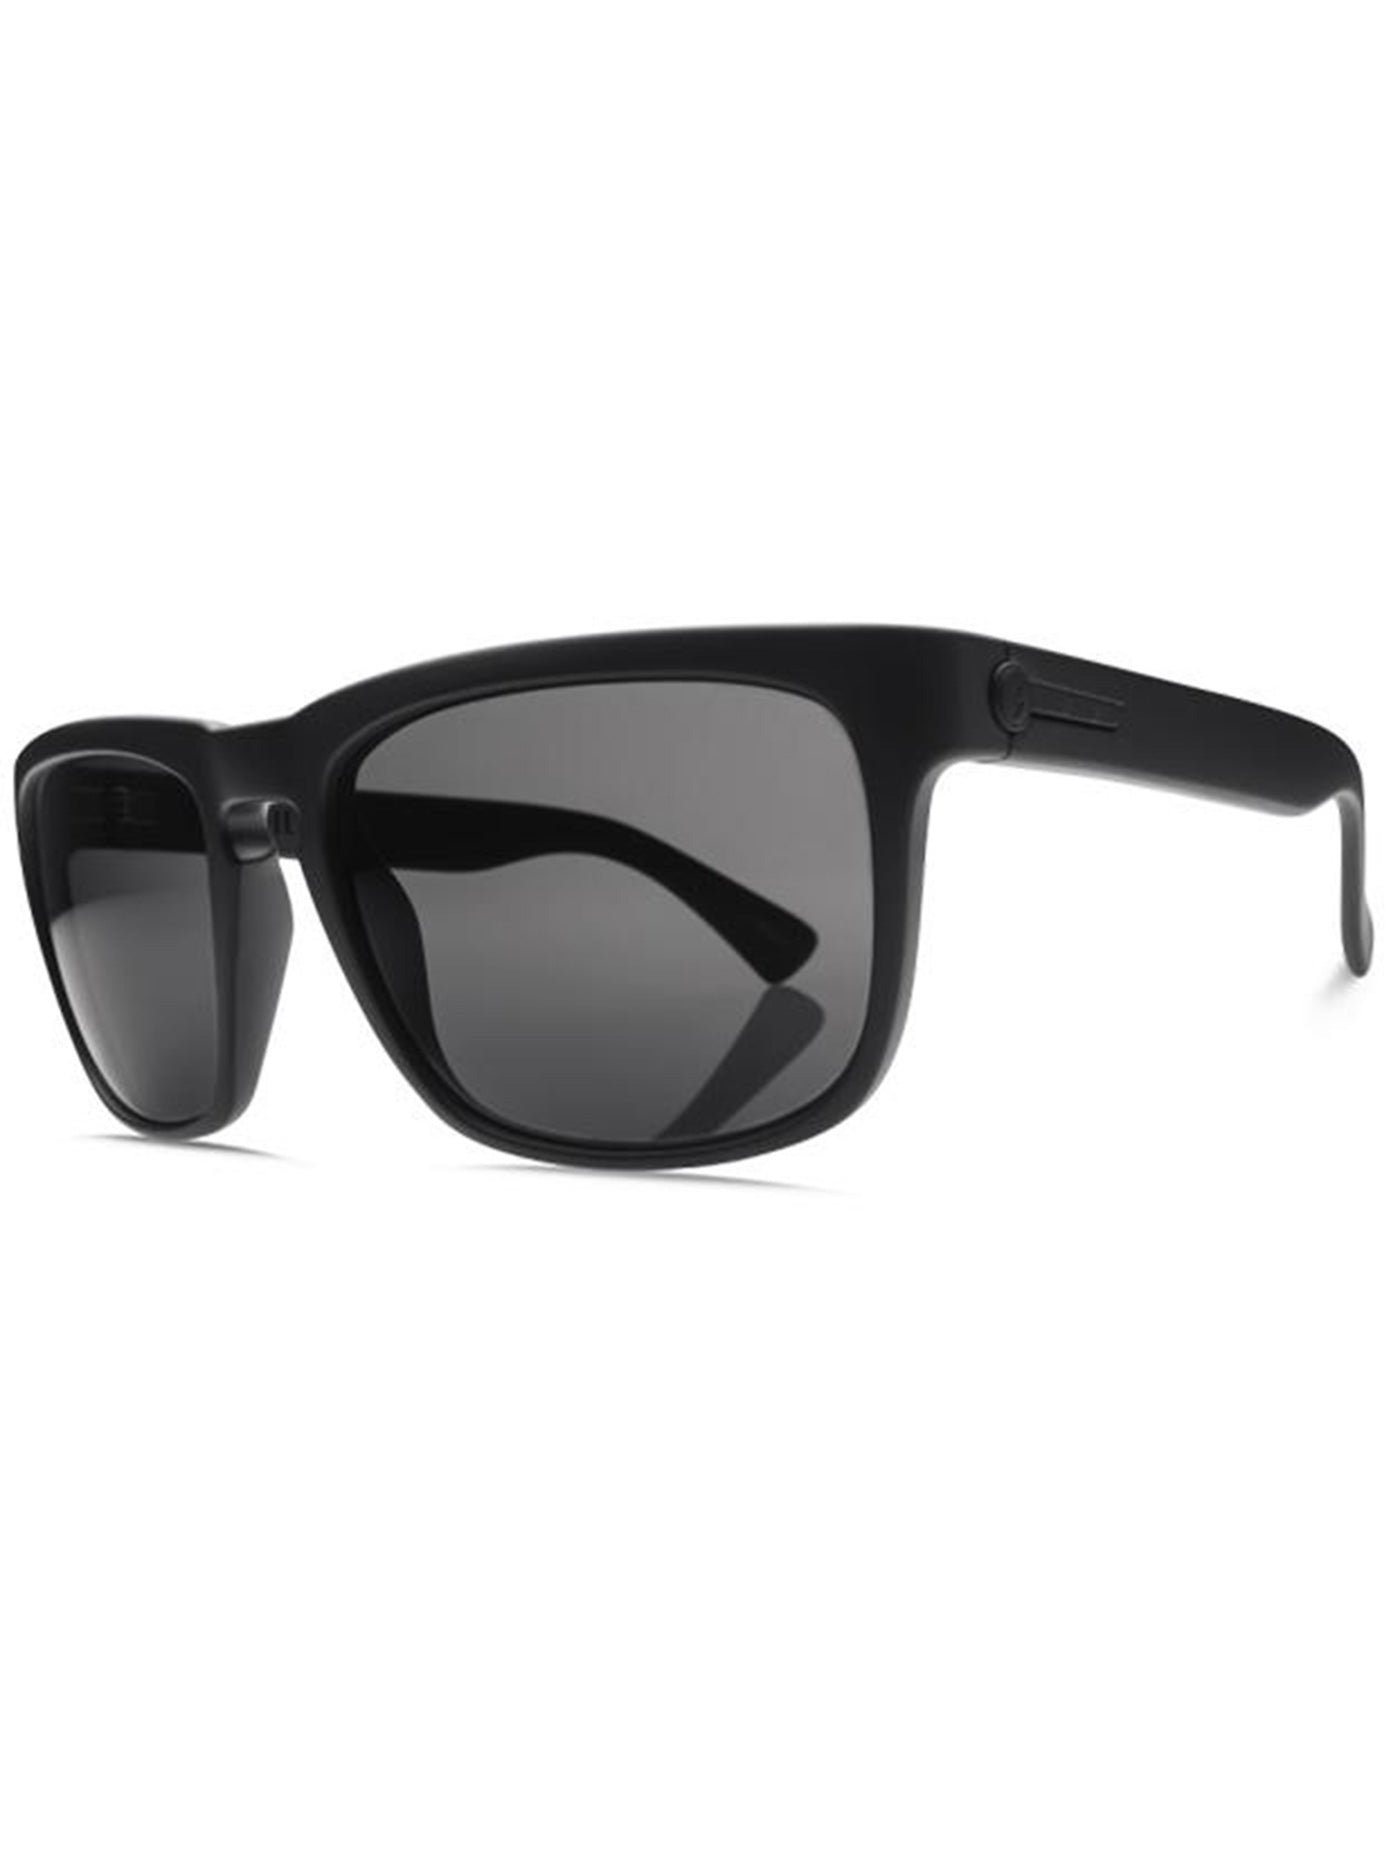 Hero XL All Black Polarized Sunglasses By Twinyards, 41% OFF